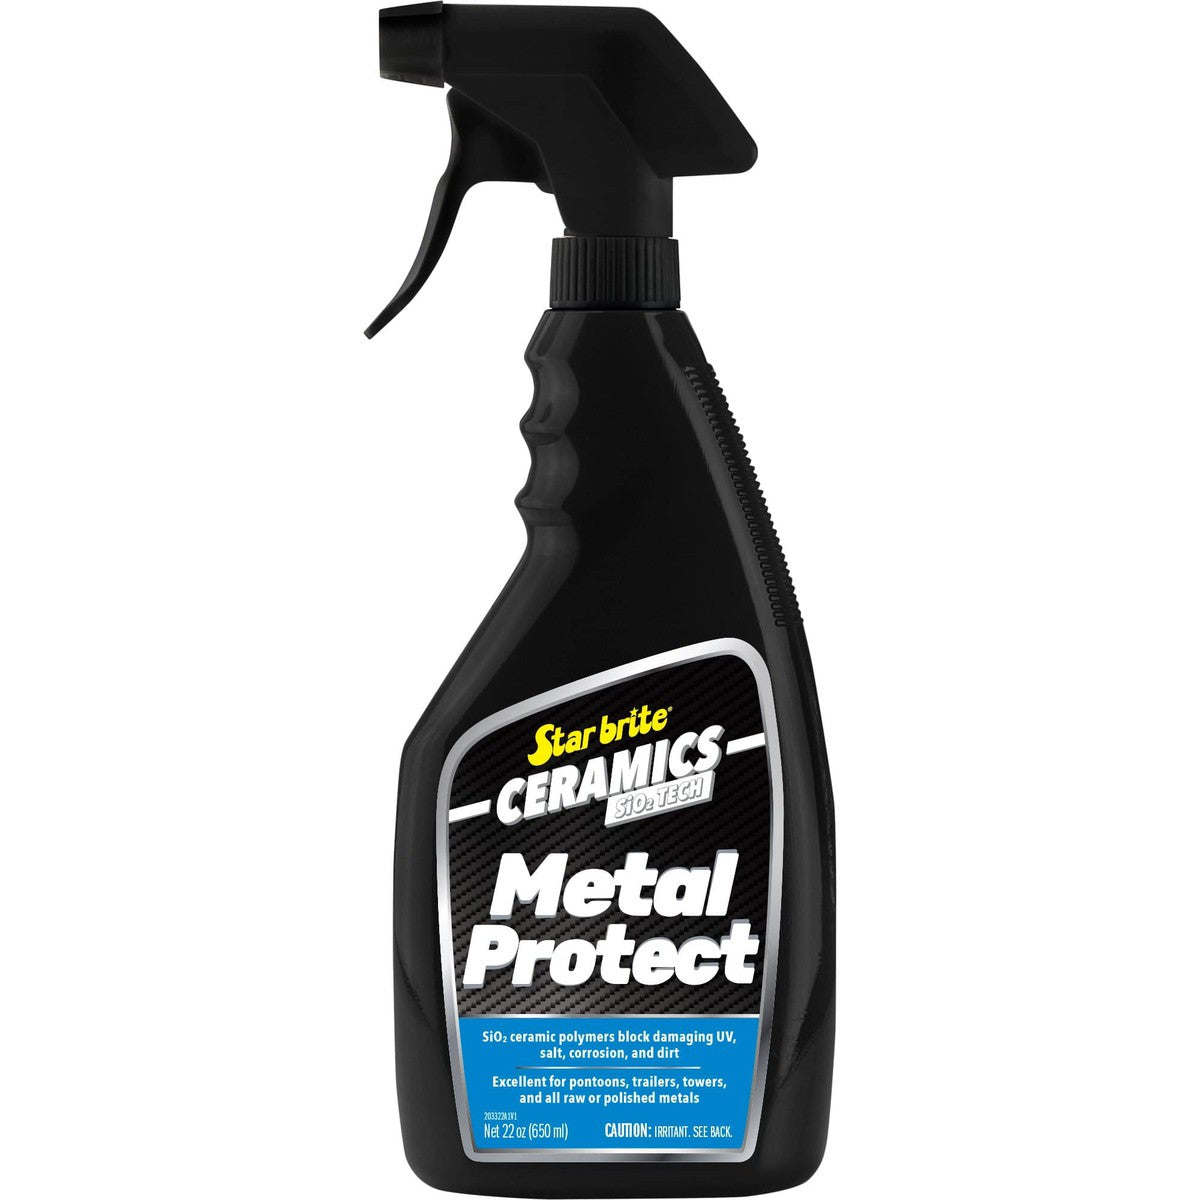 Star brite Qualifies for Free Shipping Star brite Ceramic Metal Protect 22 oz #203322